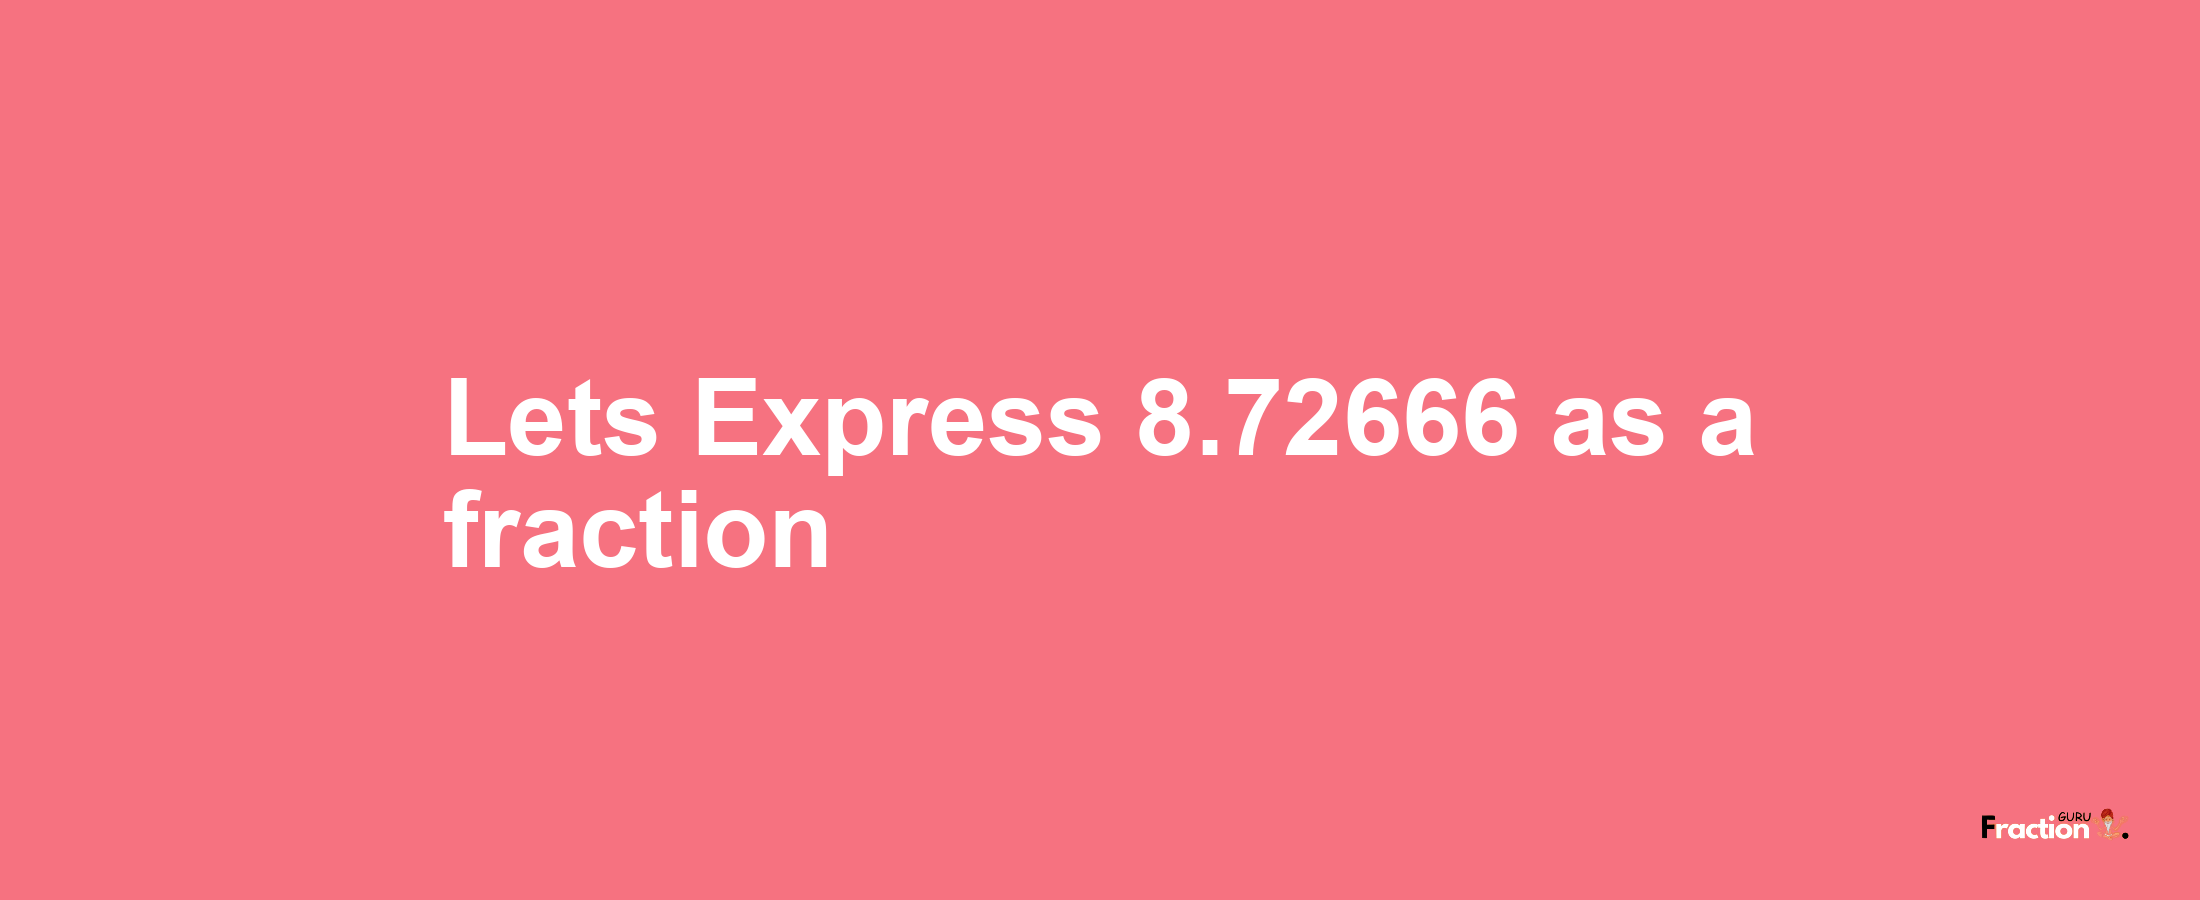 Lets Express 8.72666 as afraction